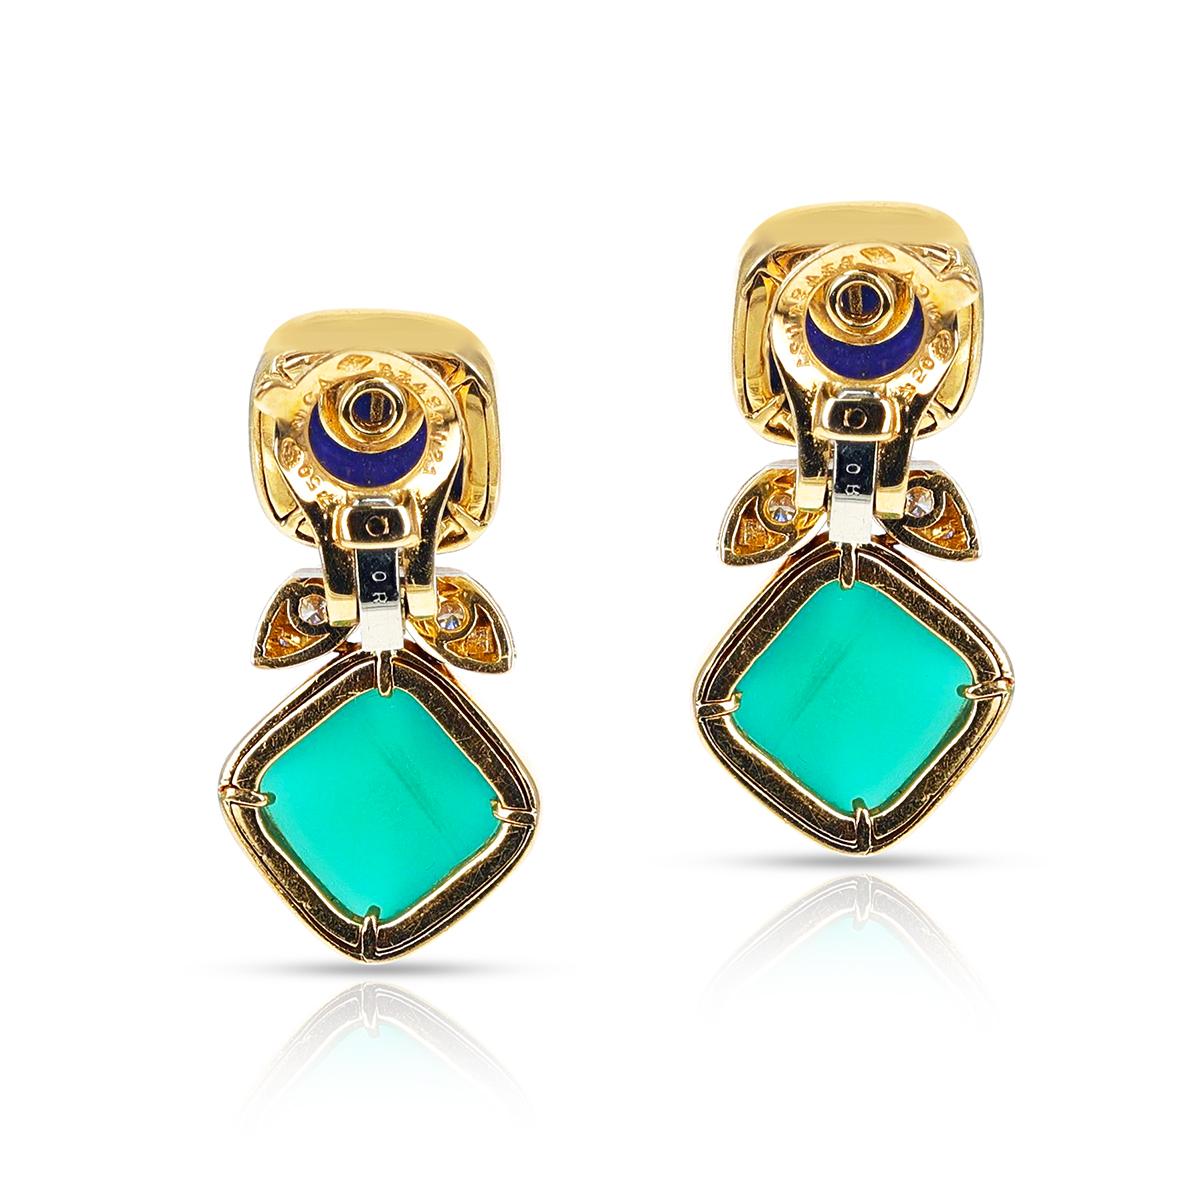 Contemporary Van Cleef & Arpels Lapis Lazuli and Chrysoprase Earrings, French